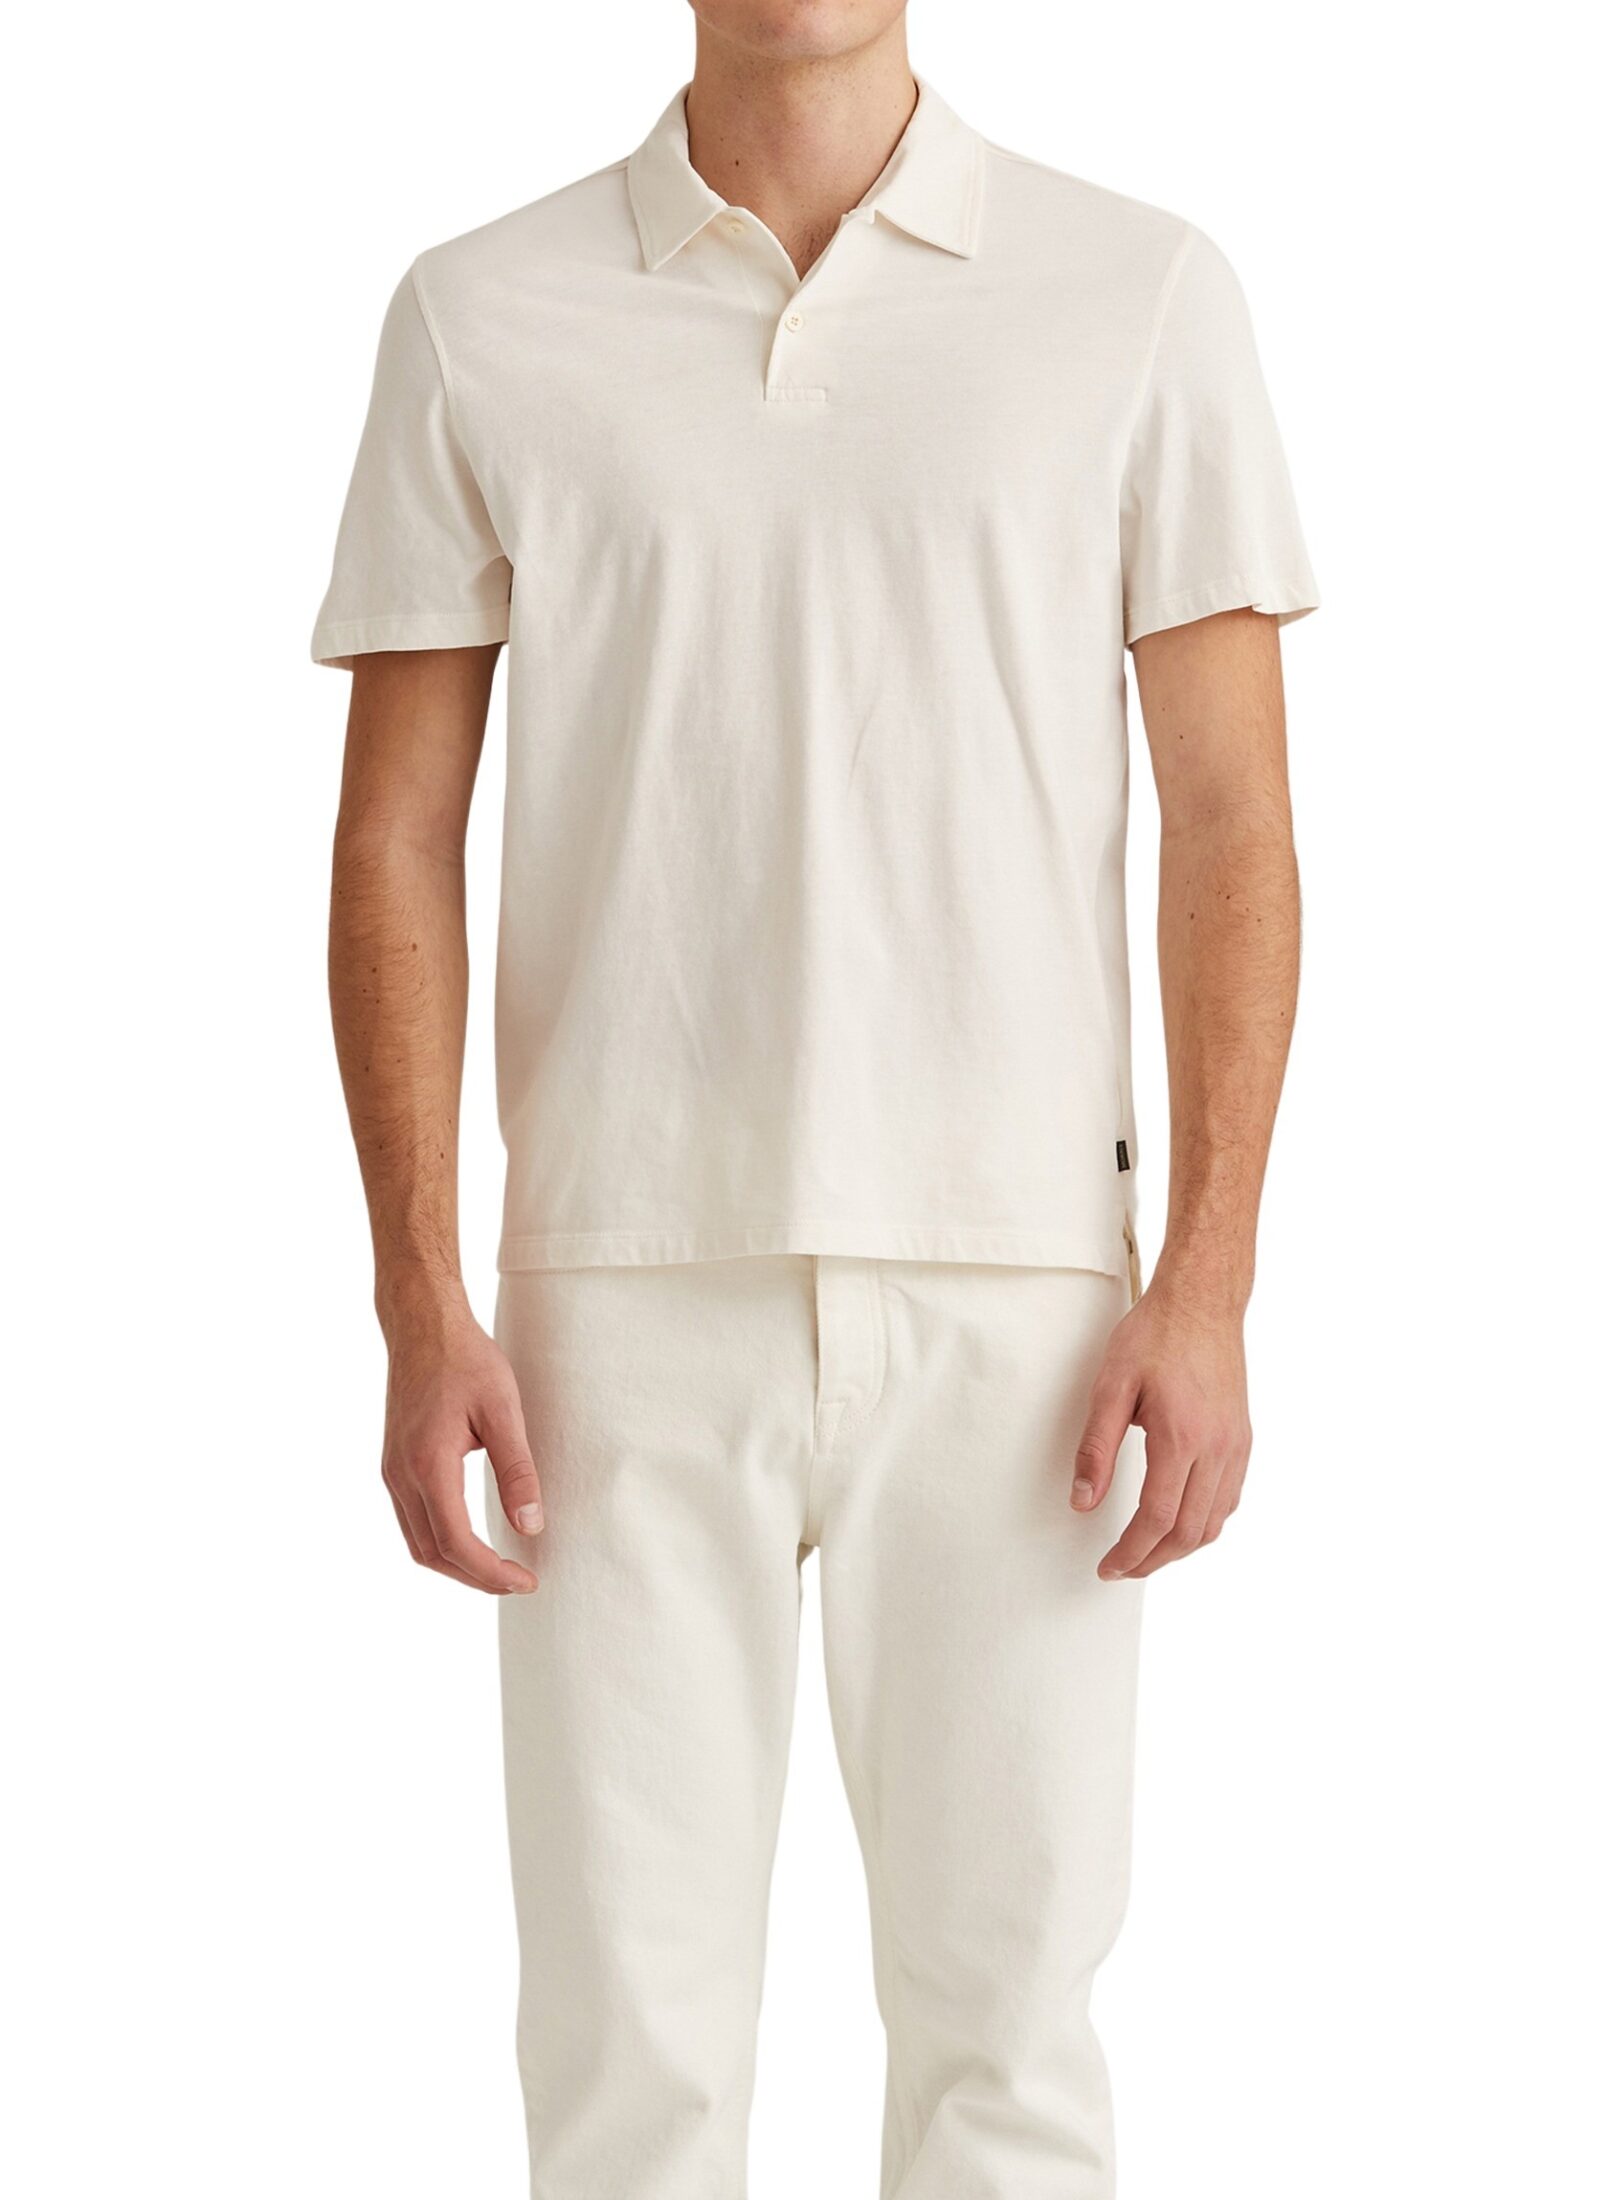 300193-durwin-ss-polo-shirt-02-off-white-1